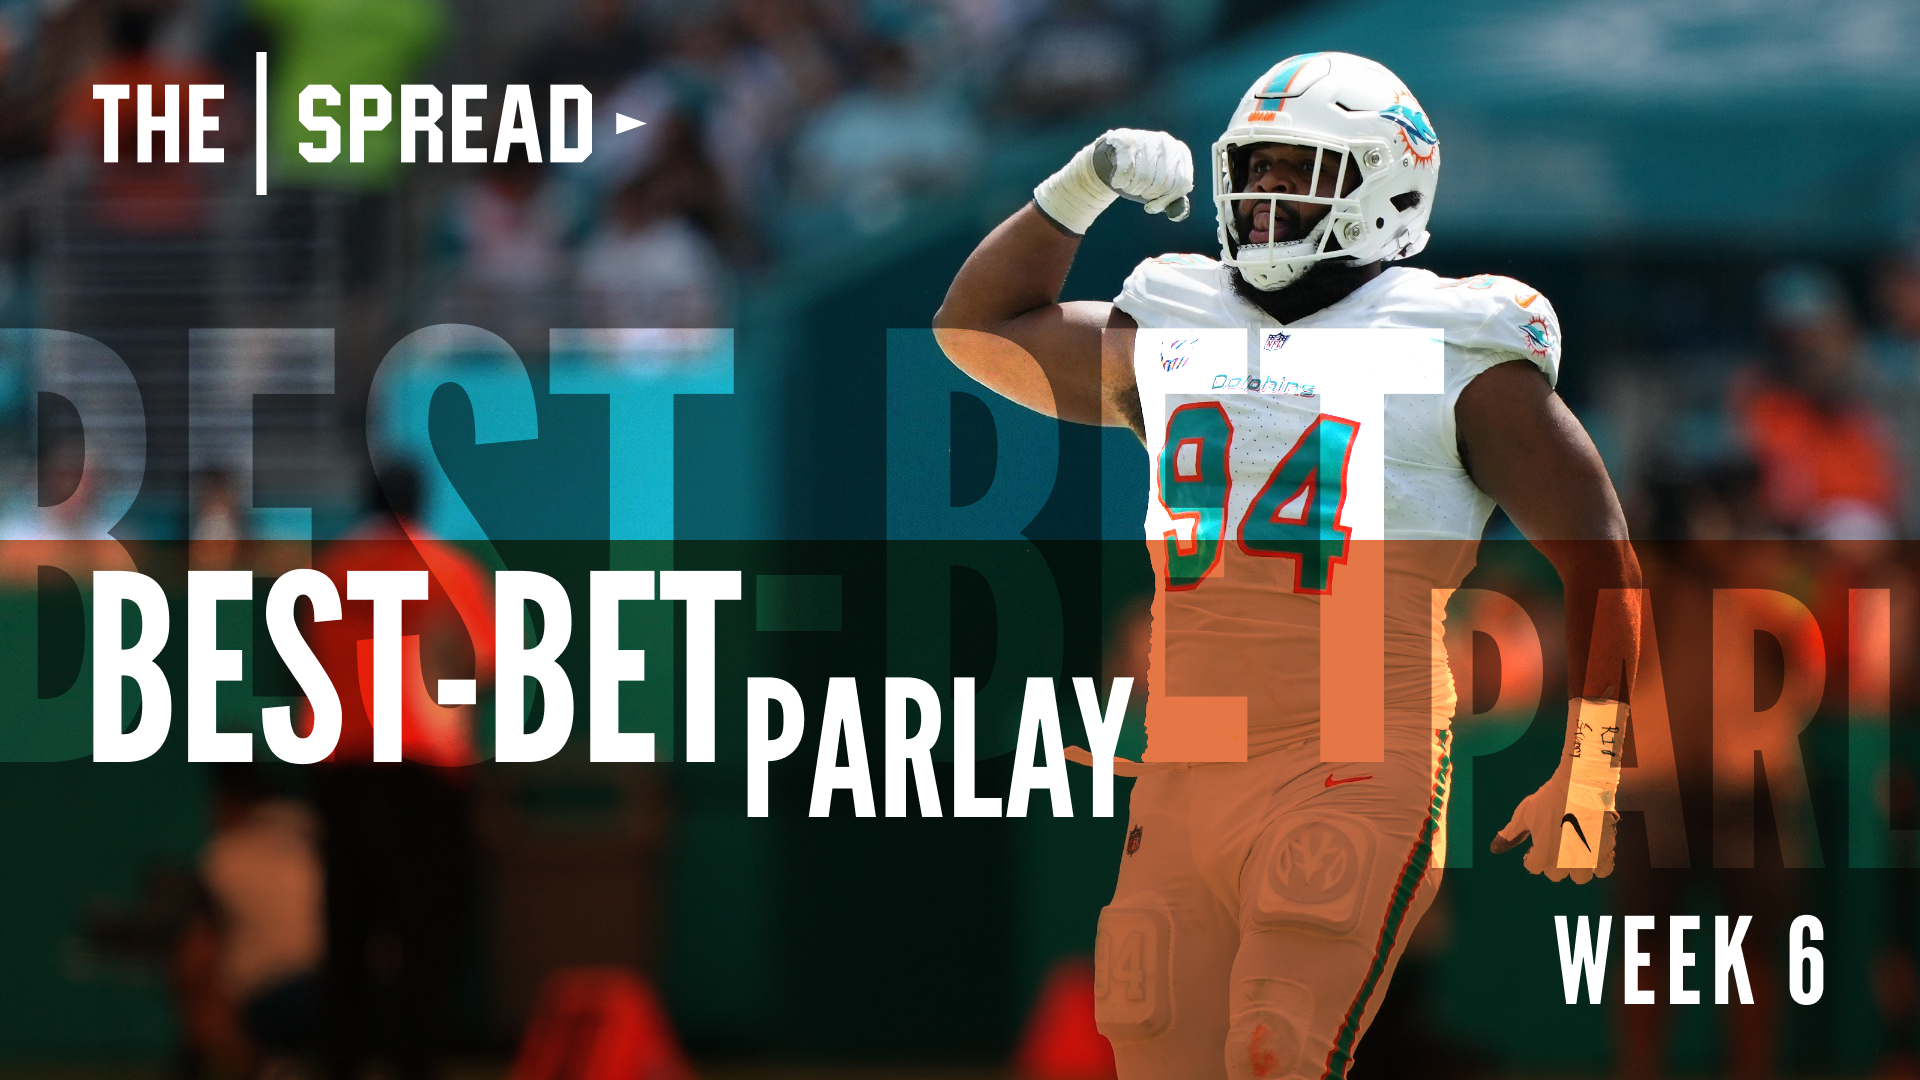 NFL Week 1 Spreads: Five Best Games to Bet